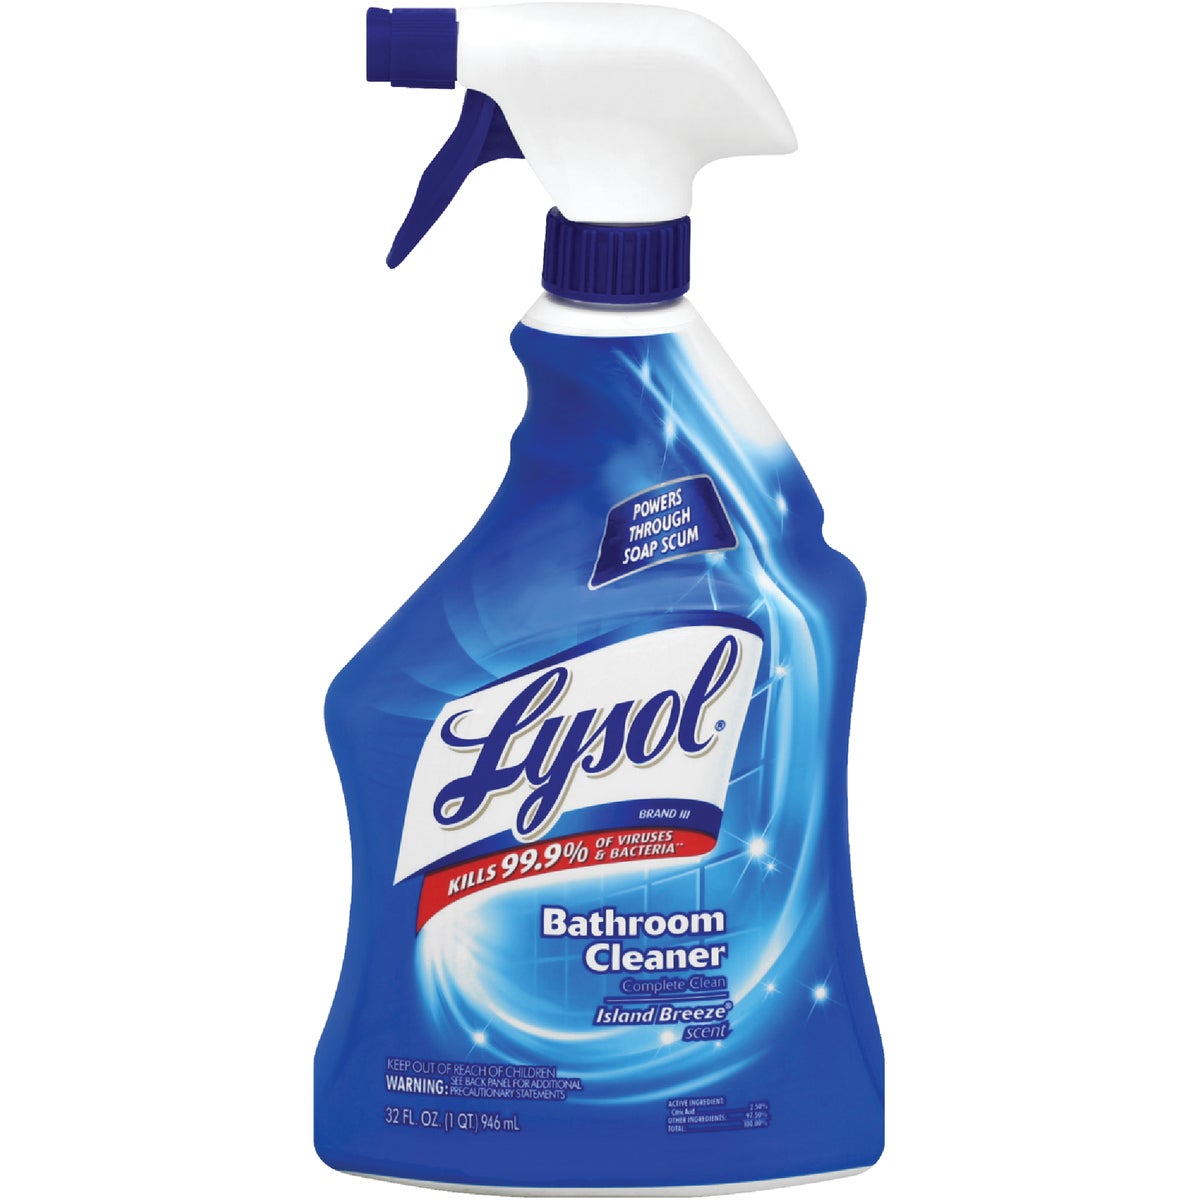 Item 630624, Effectively cleans, shines, and disinfects washable surfaces and fixtures 